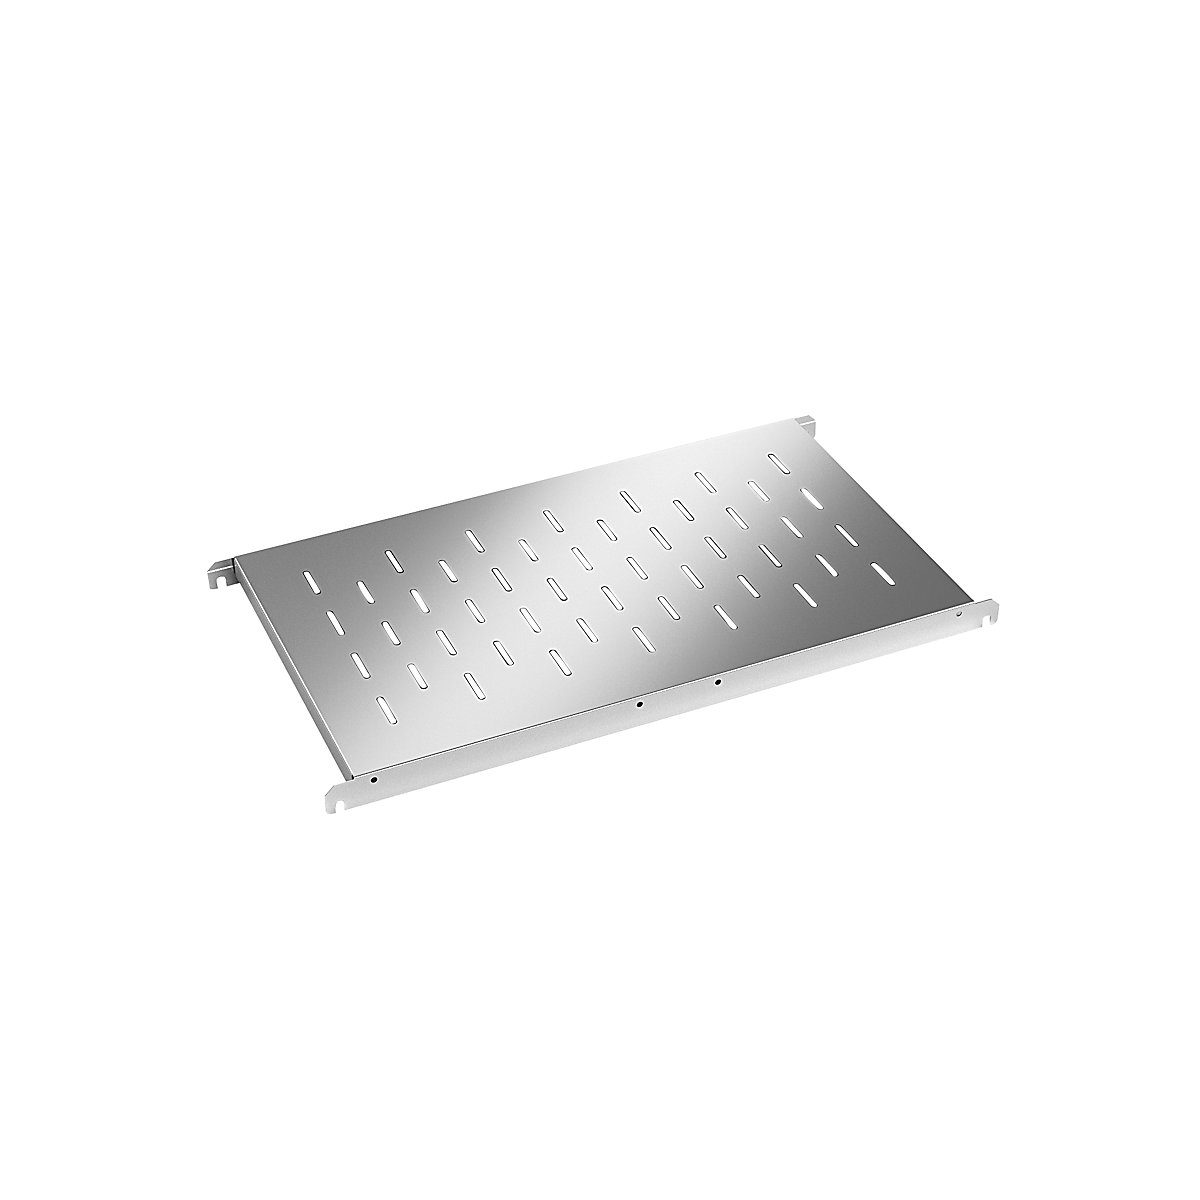 Stainless steel shelf, perforated, WxD 740 x 440 mm